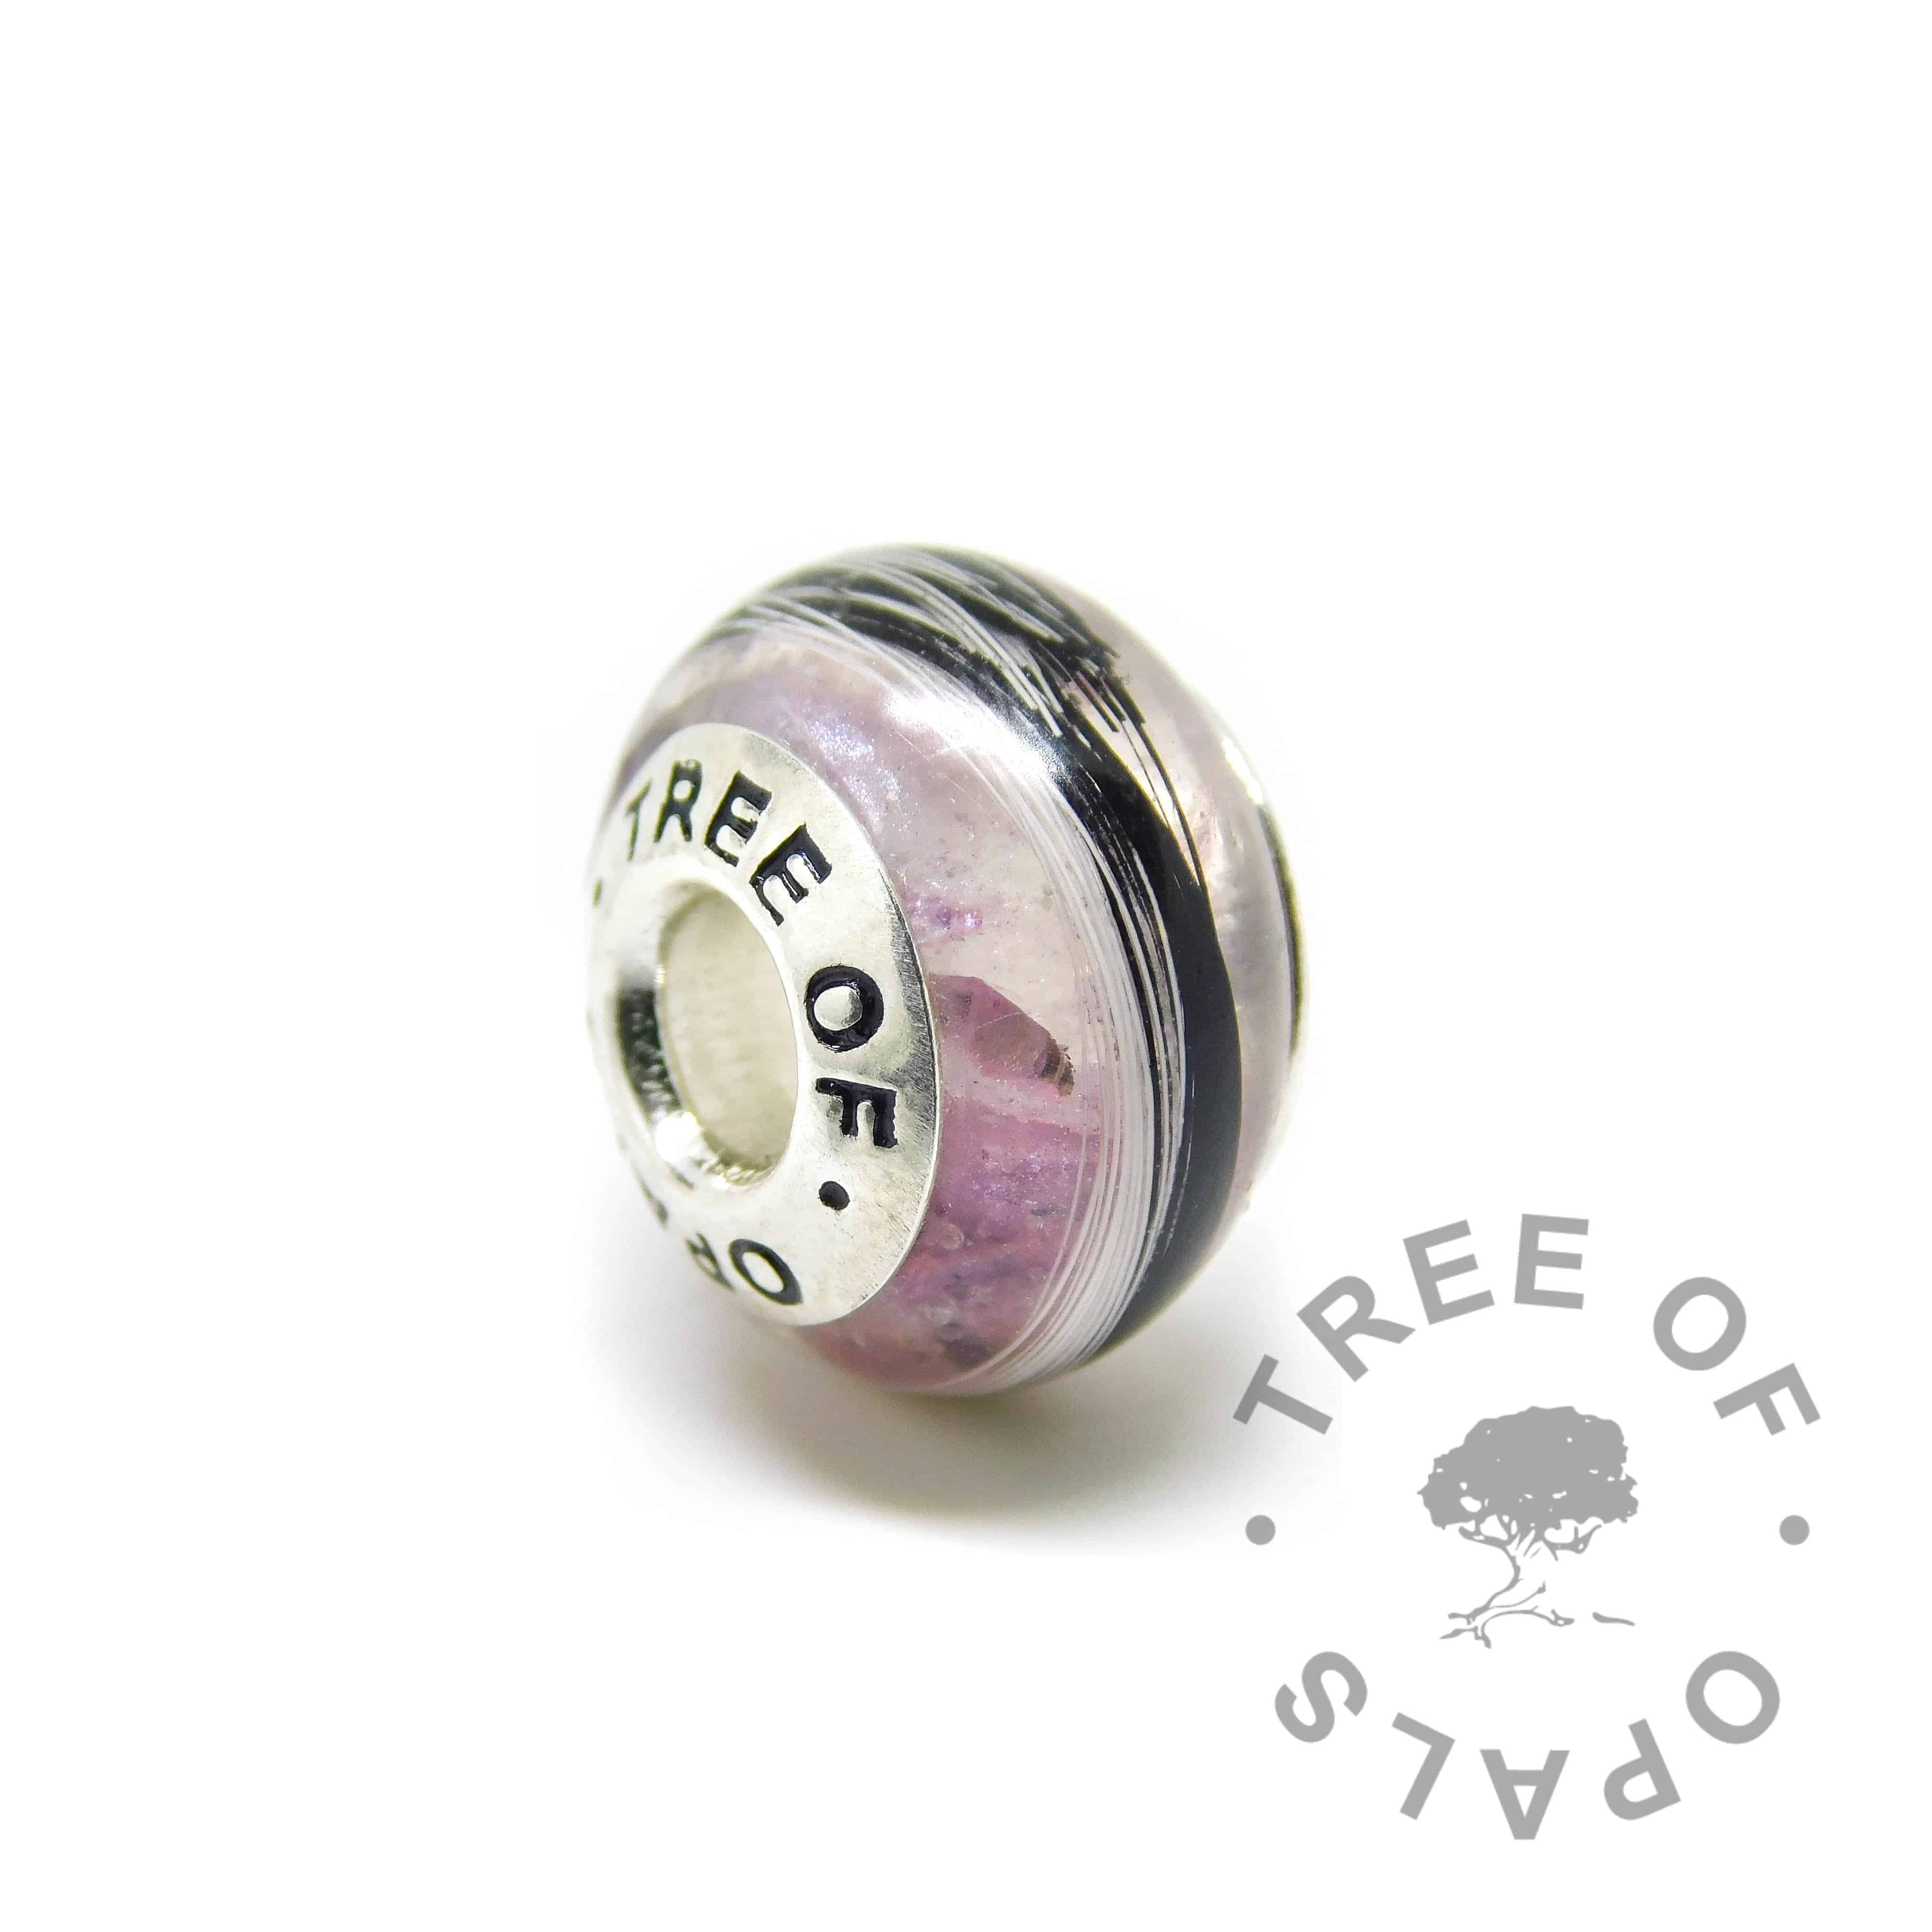 orchid purple horse hair charm bead with solid sterling silver Tree of Opals core on white background watermarked image